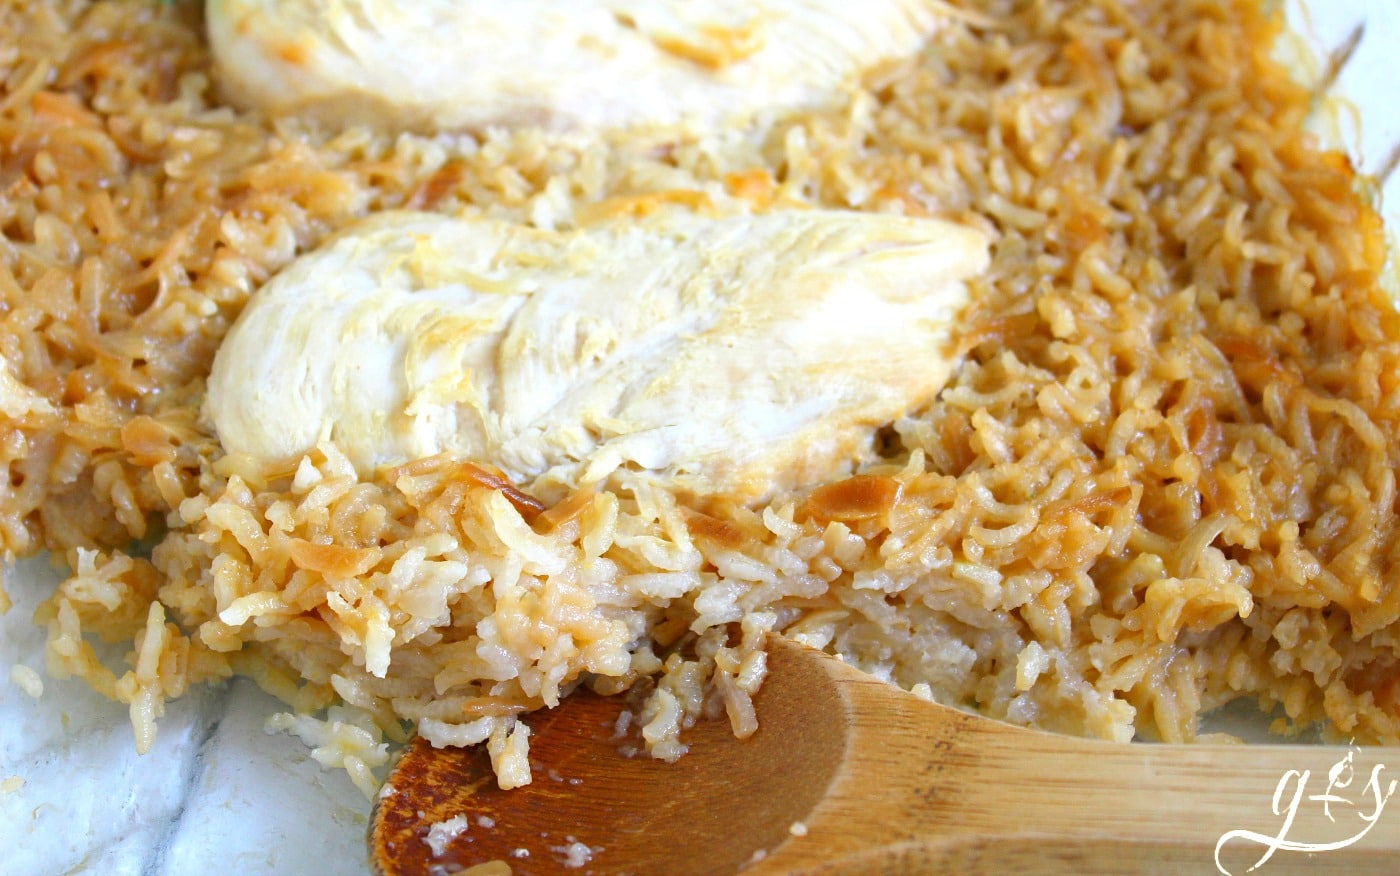  The BEST Chicken & Rice Casserole | This creamy and easy homemade recipe only requires 5 simple ingredients! A little rice, a can of Cream of Chicken soup, onion soup mix, and chicken have never tasted so good in this baked dish. Let your kids help you prepare this quick comfort foods recipe! Add a side salad or cooked veggie and Viola you have a family favorite meal in the making. {Families - Dinners - Recipes}